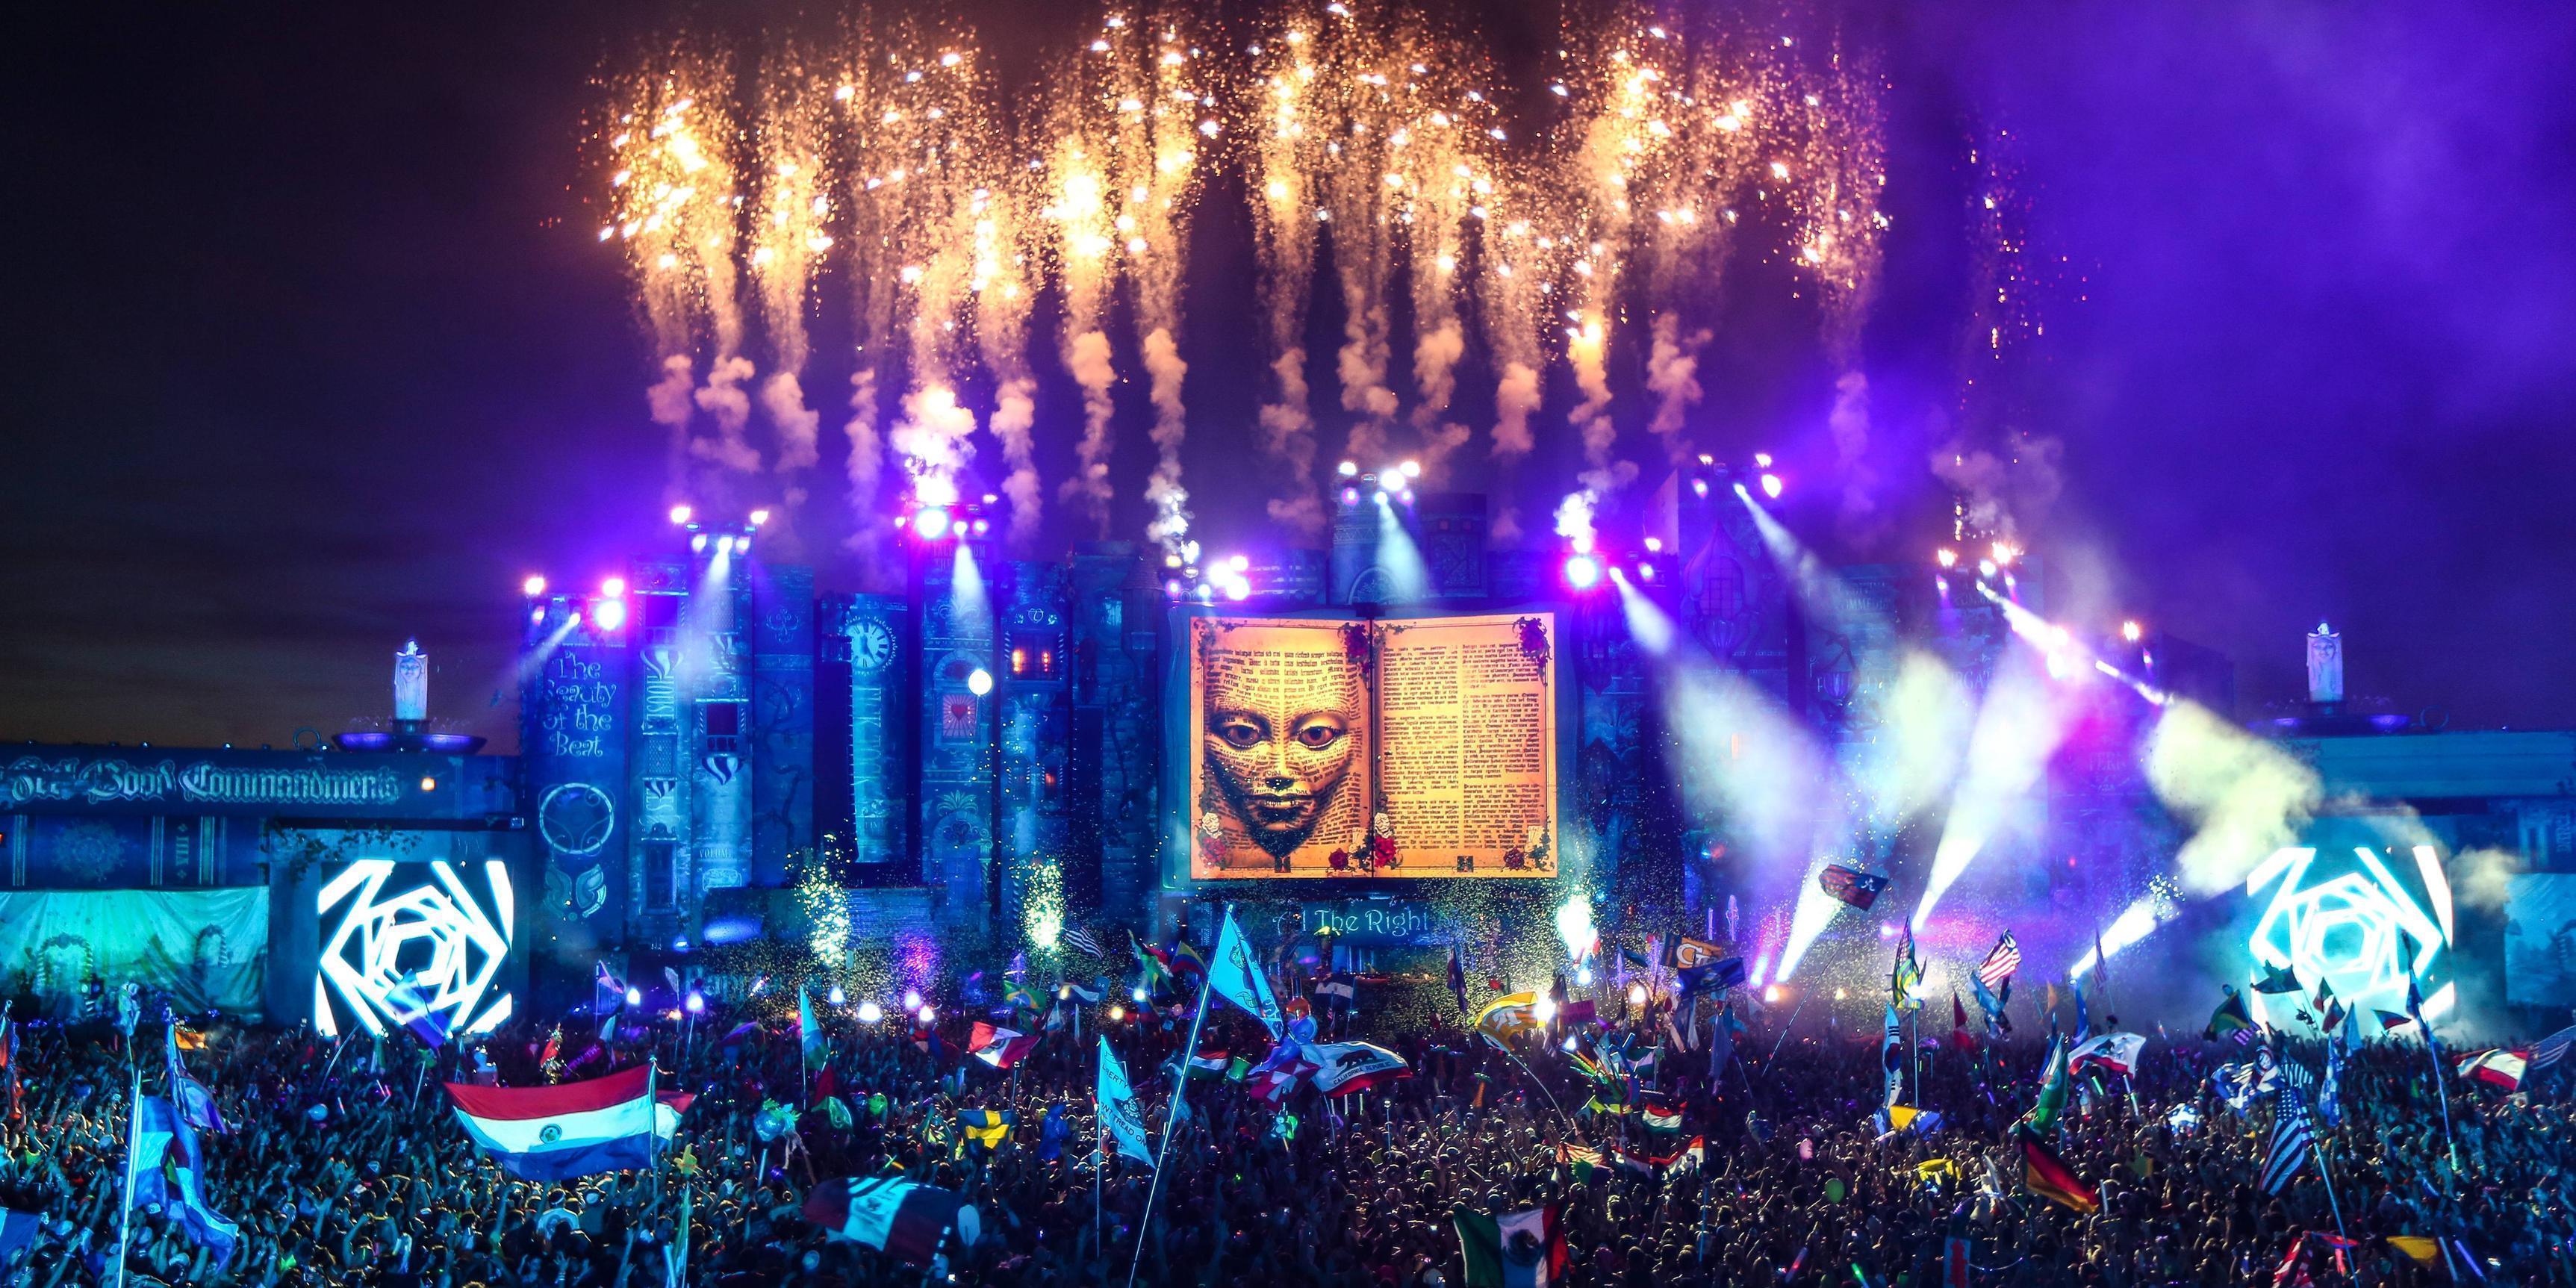 Tomorrowland 2015 Laser Show Hd Wallpapers - Imagenes De Tomorrowland 2018 Hd , HD Wallpaper & Backgrounds